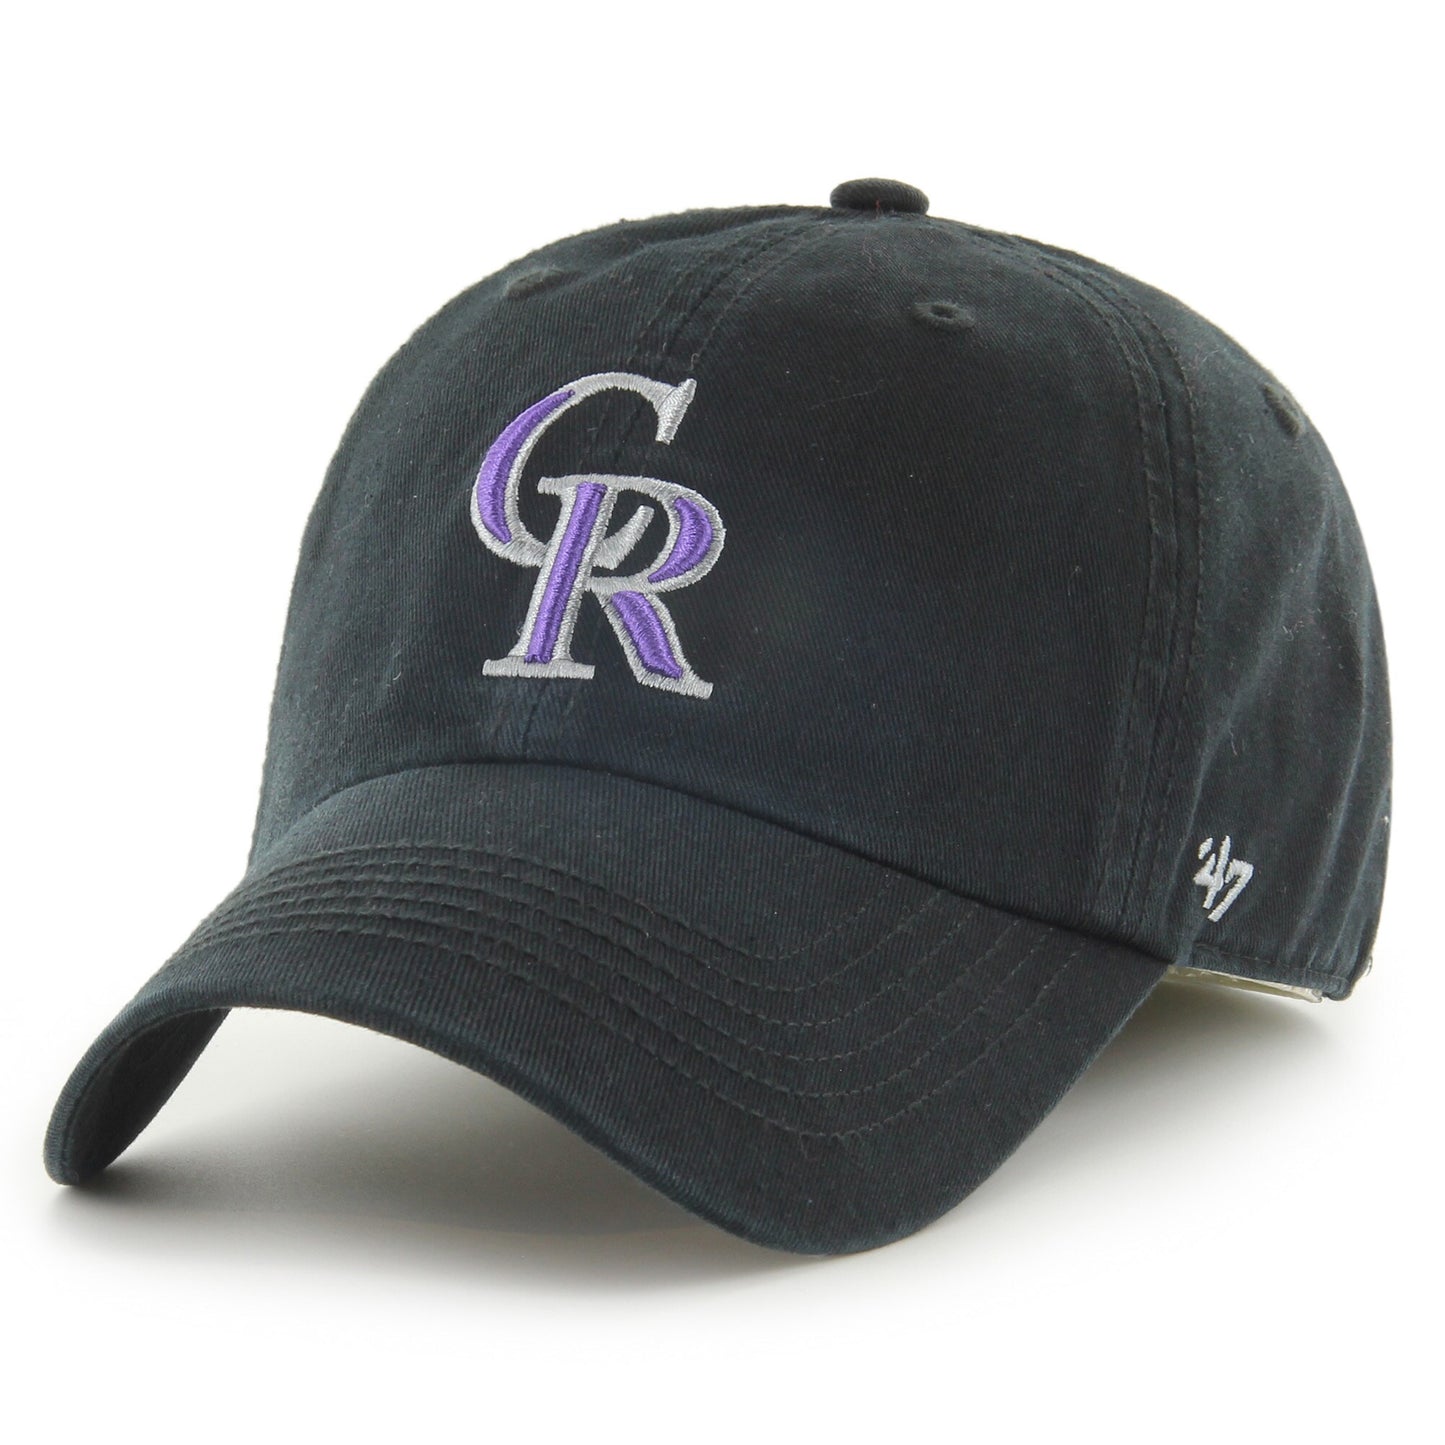 Colorado Rockies '47 Franchise Logo Fitted Hat - Black